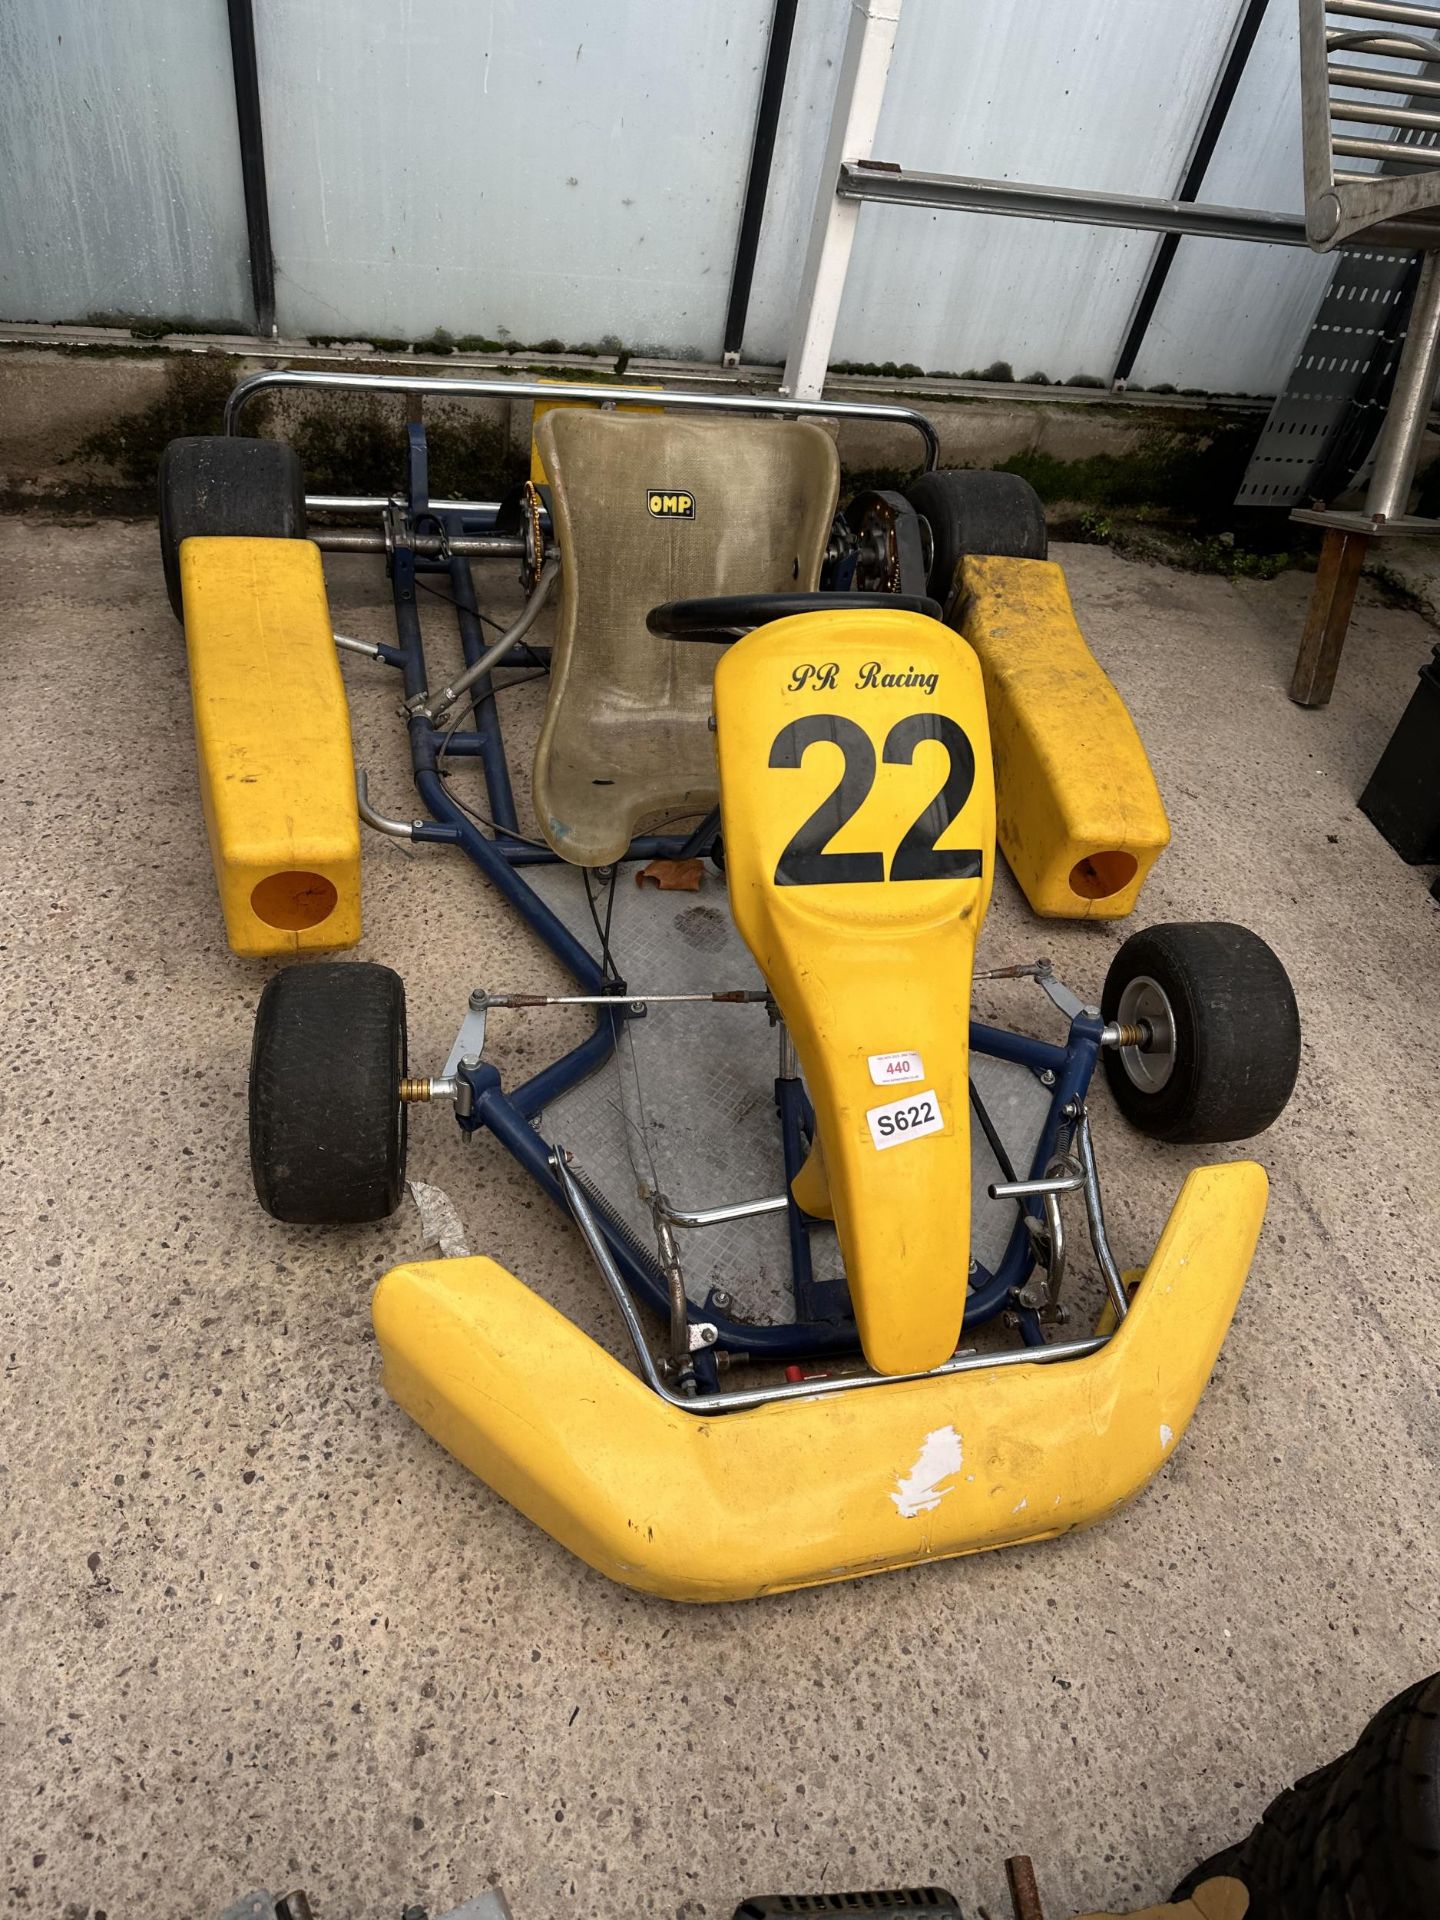 GO KART,2 HONDA ENGINES, SPARE WHEELS ETC. AND TROLLEY NO VAT - Image 2 of 8